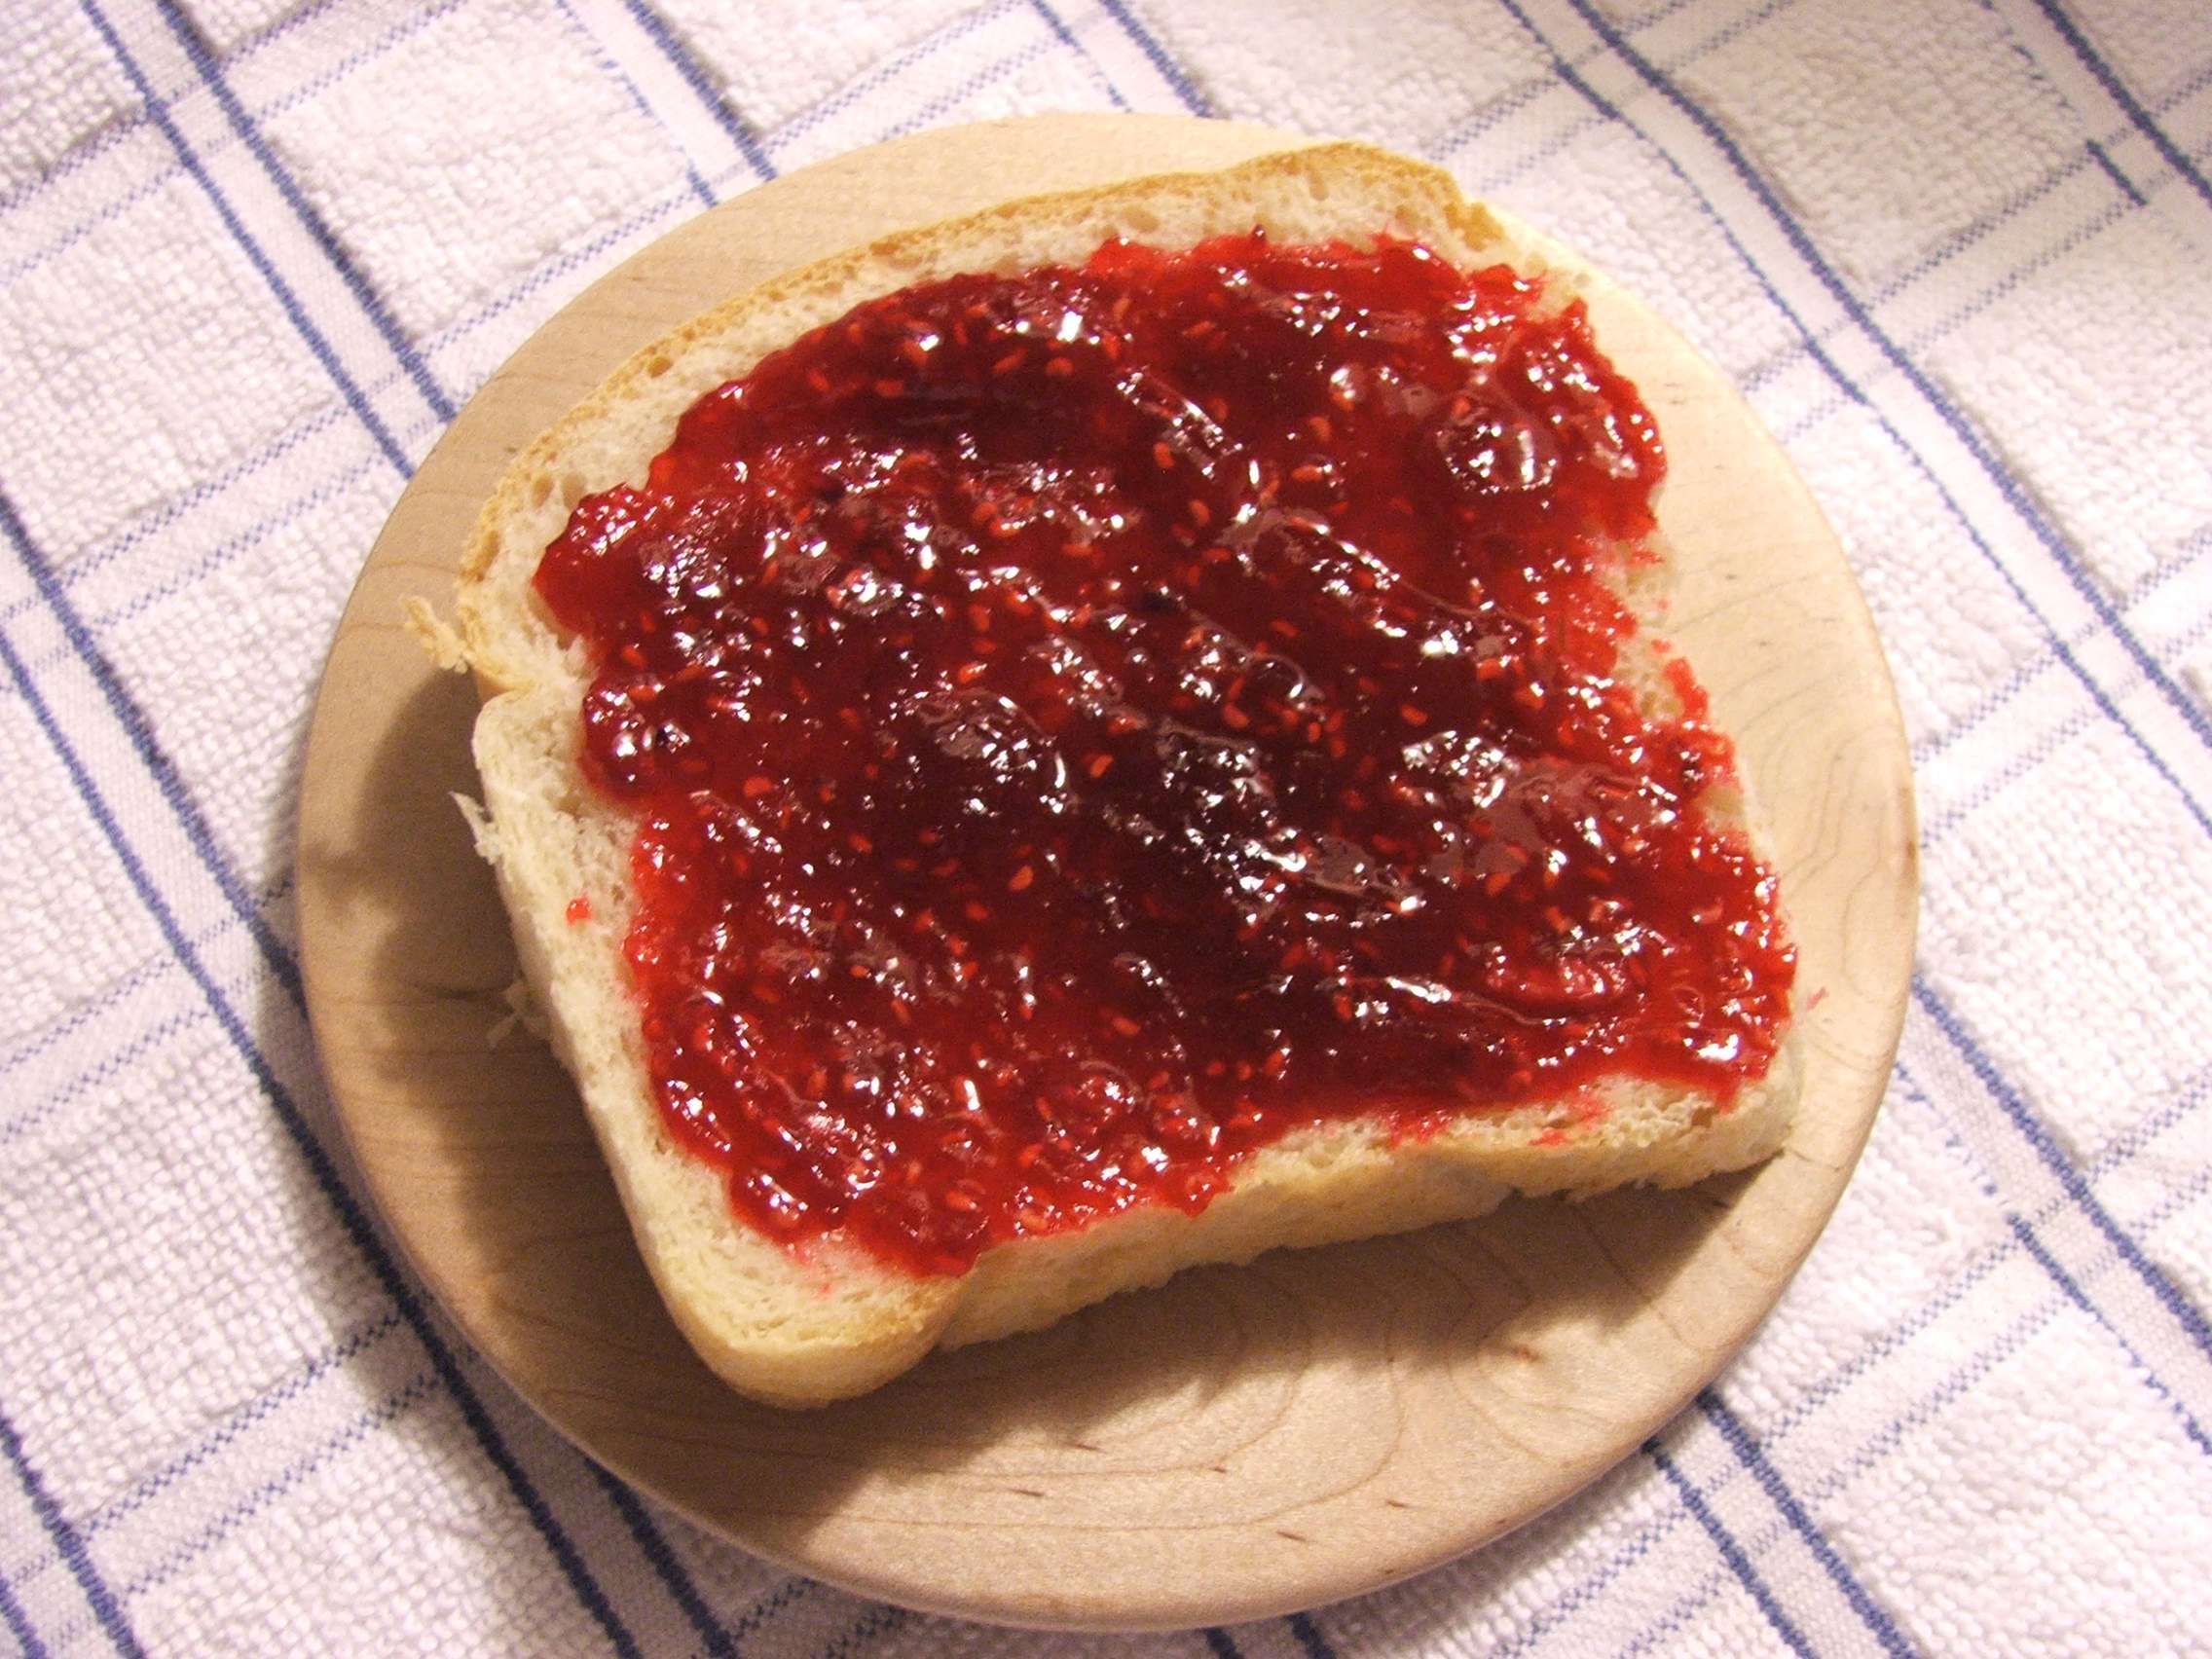 Raspberry jam. - Getting There